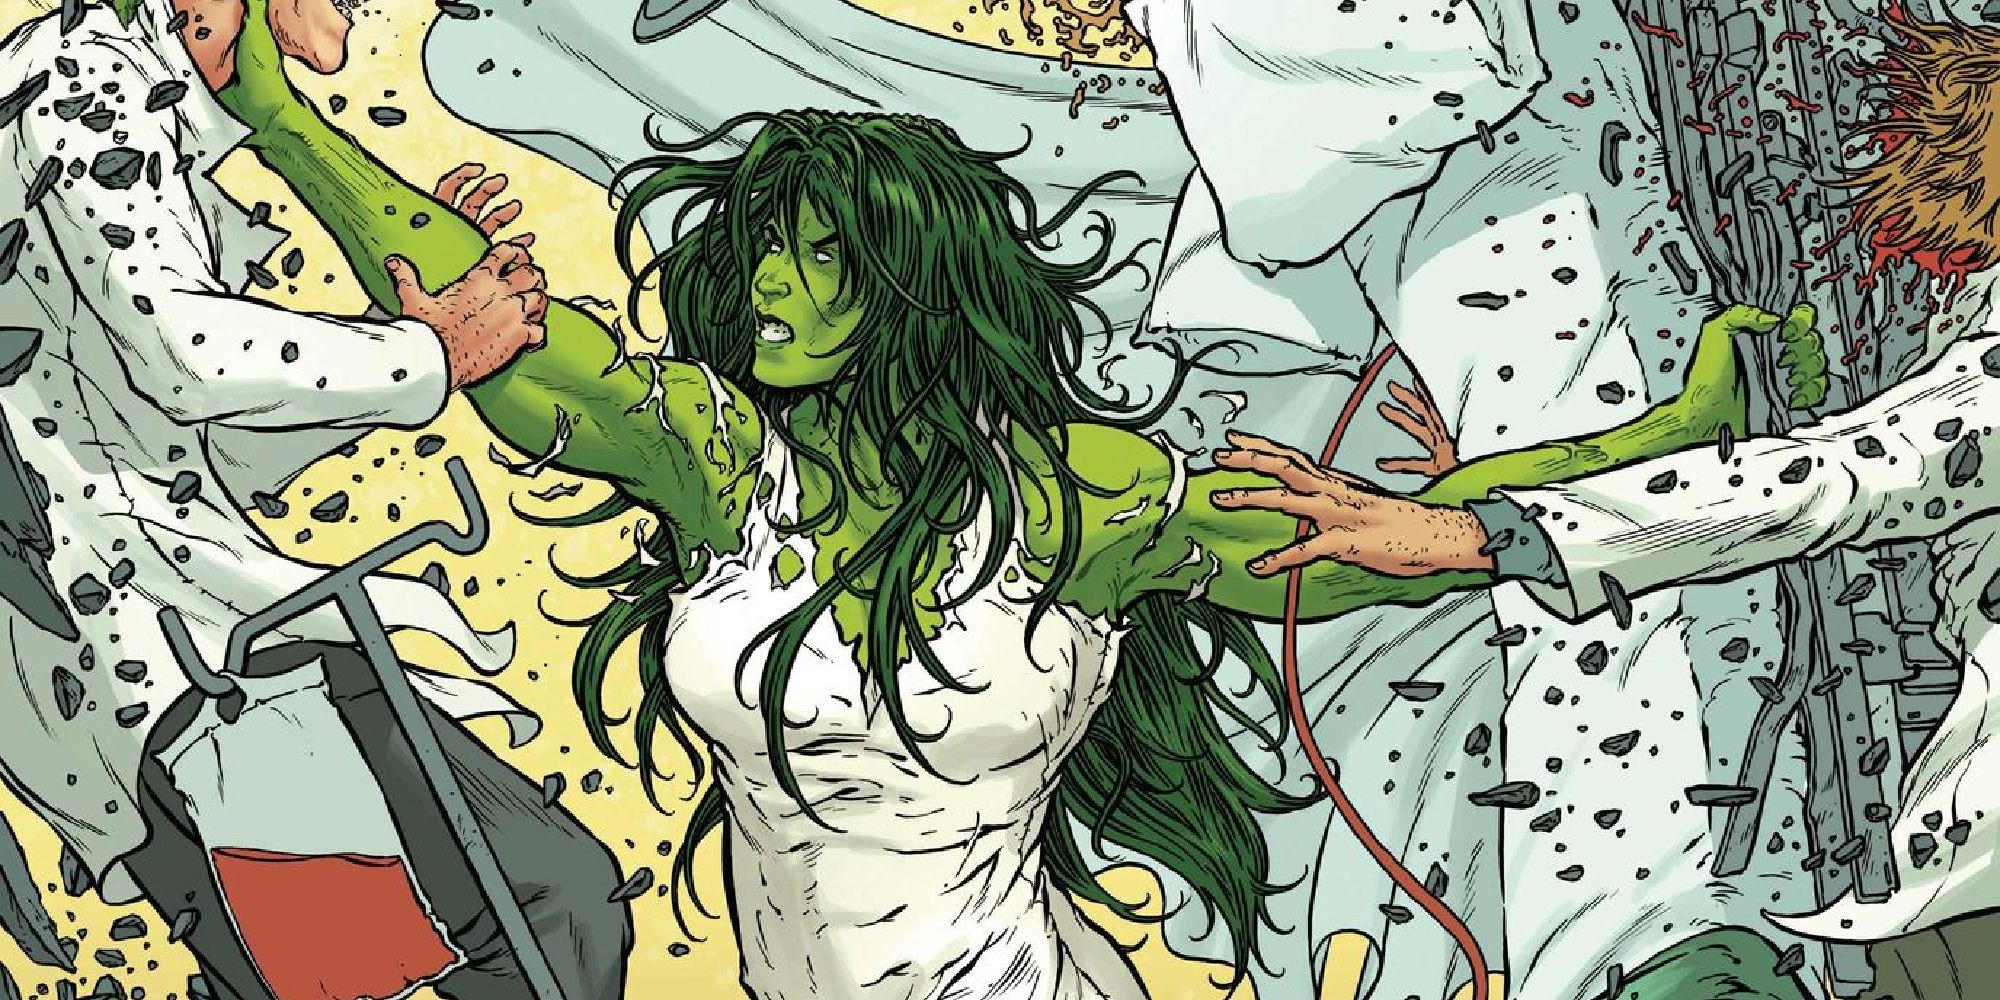 Jennifer Walters transforming into She-Hulk and attacking doctors in the comics